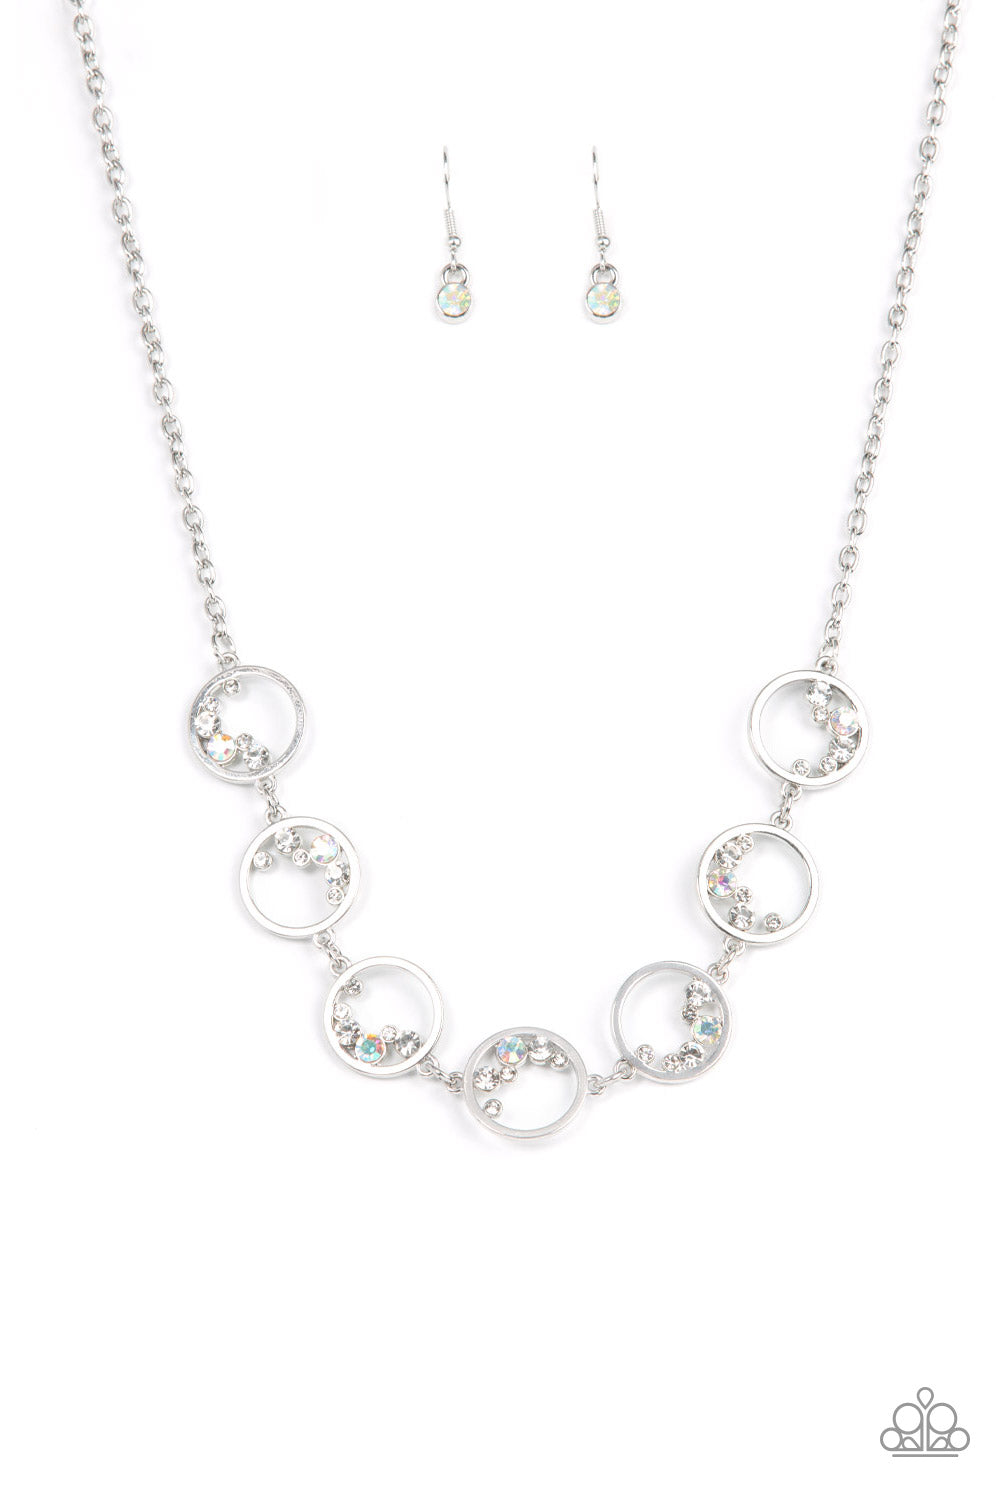 Blissfully Bubbly - White and Silver Necklace - Paparazzi Accessories - A dainty series of shiny silver rings are sporadically dotted in bubbly rows of glassy and iridescent white rhinestones as they delicately link below the collar, resulting in an effervescent display. Features an adjustable clasp closure stylish necklace. 